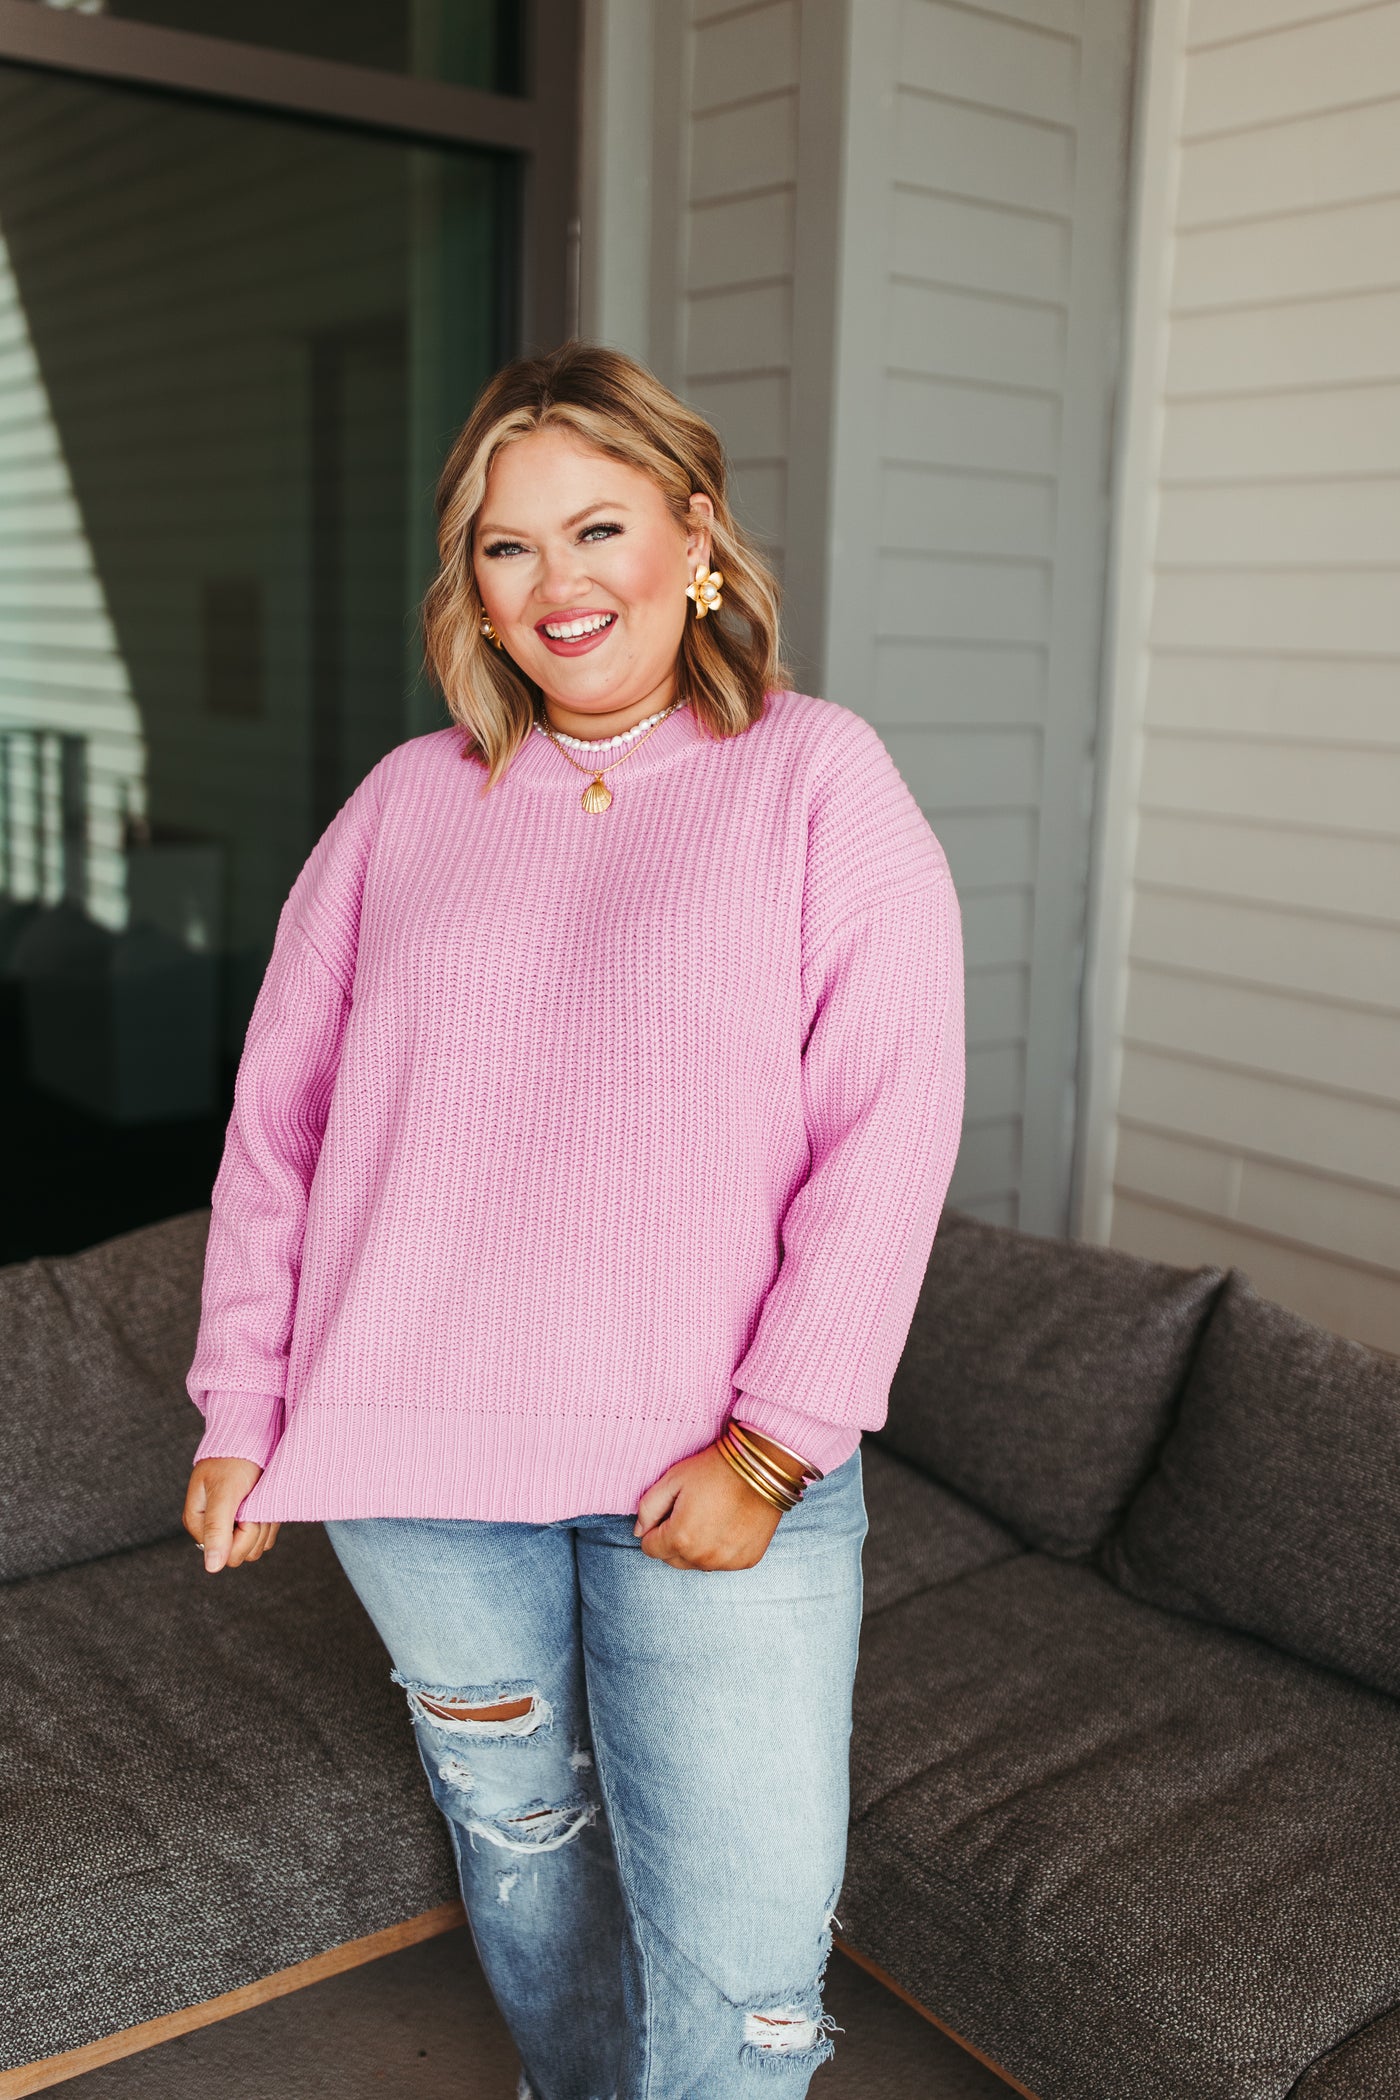 Pink Chunky Knit Round Neck Pullover